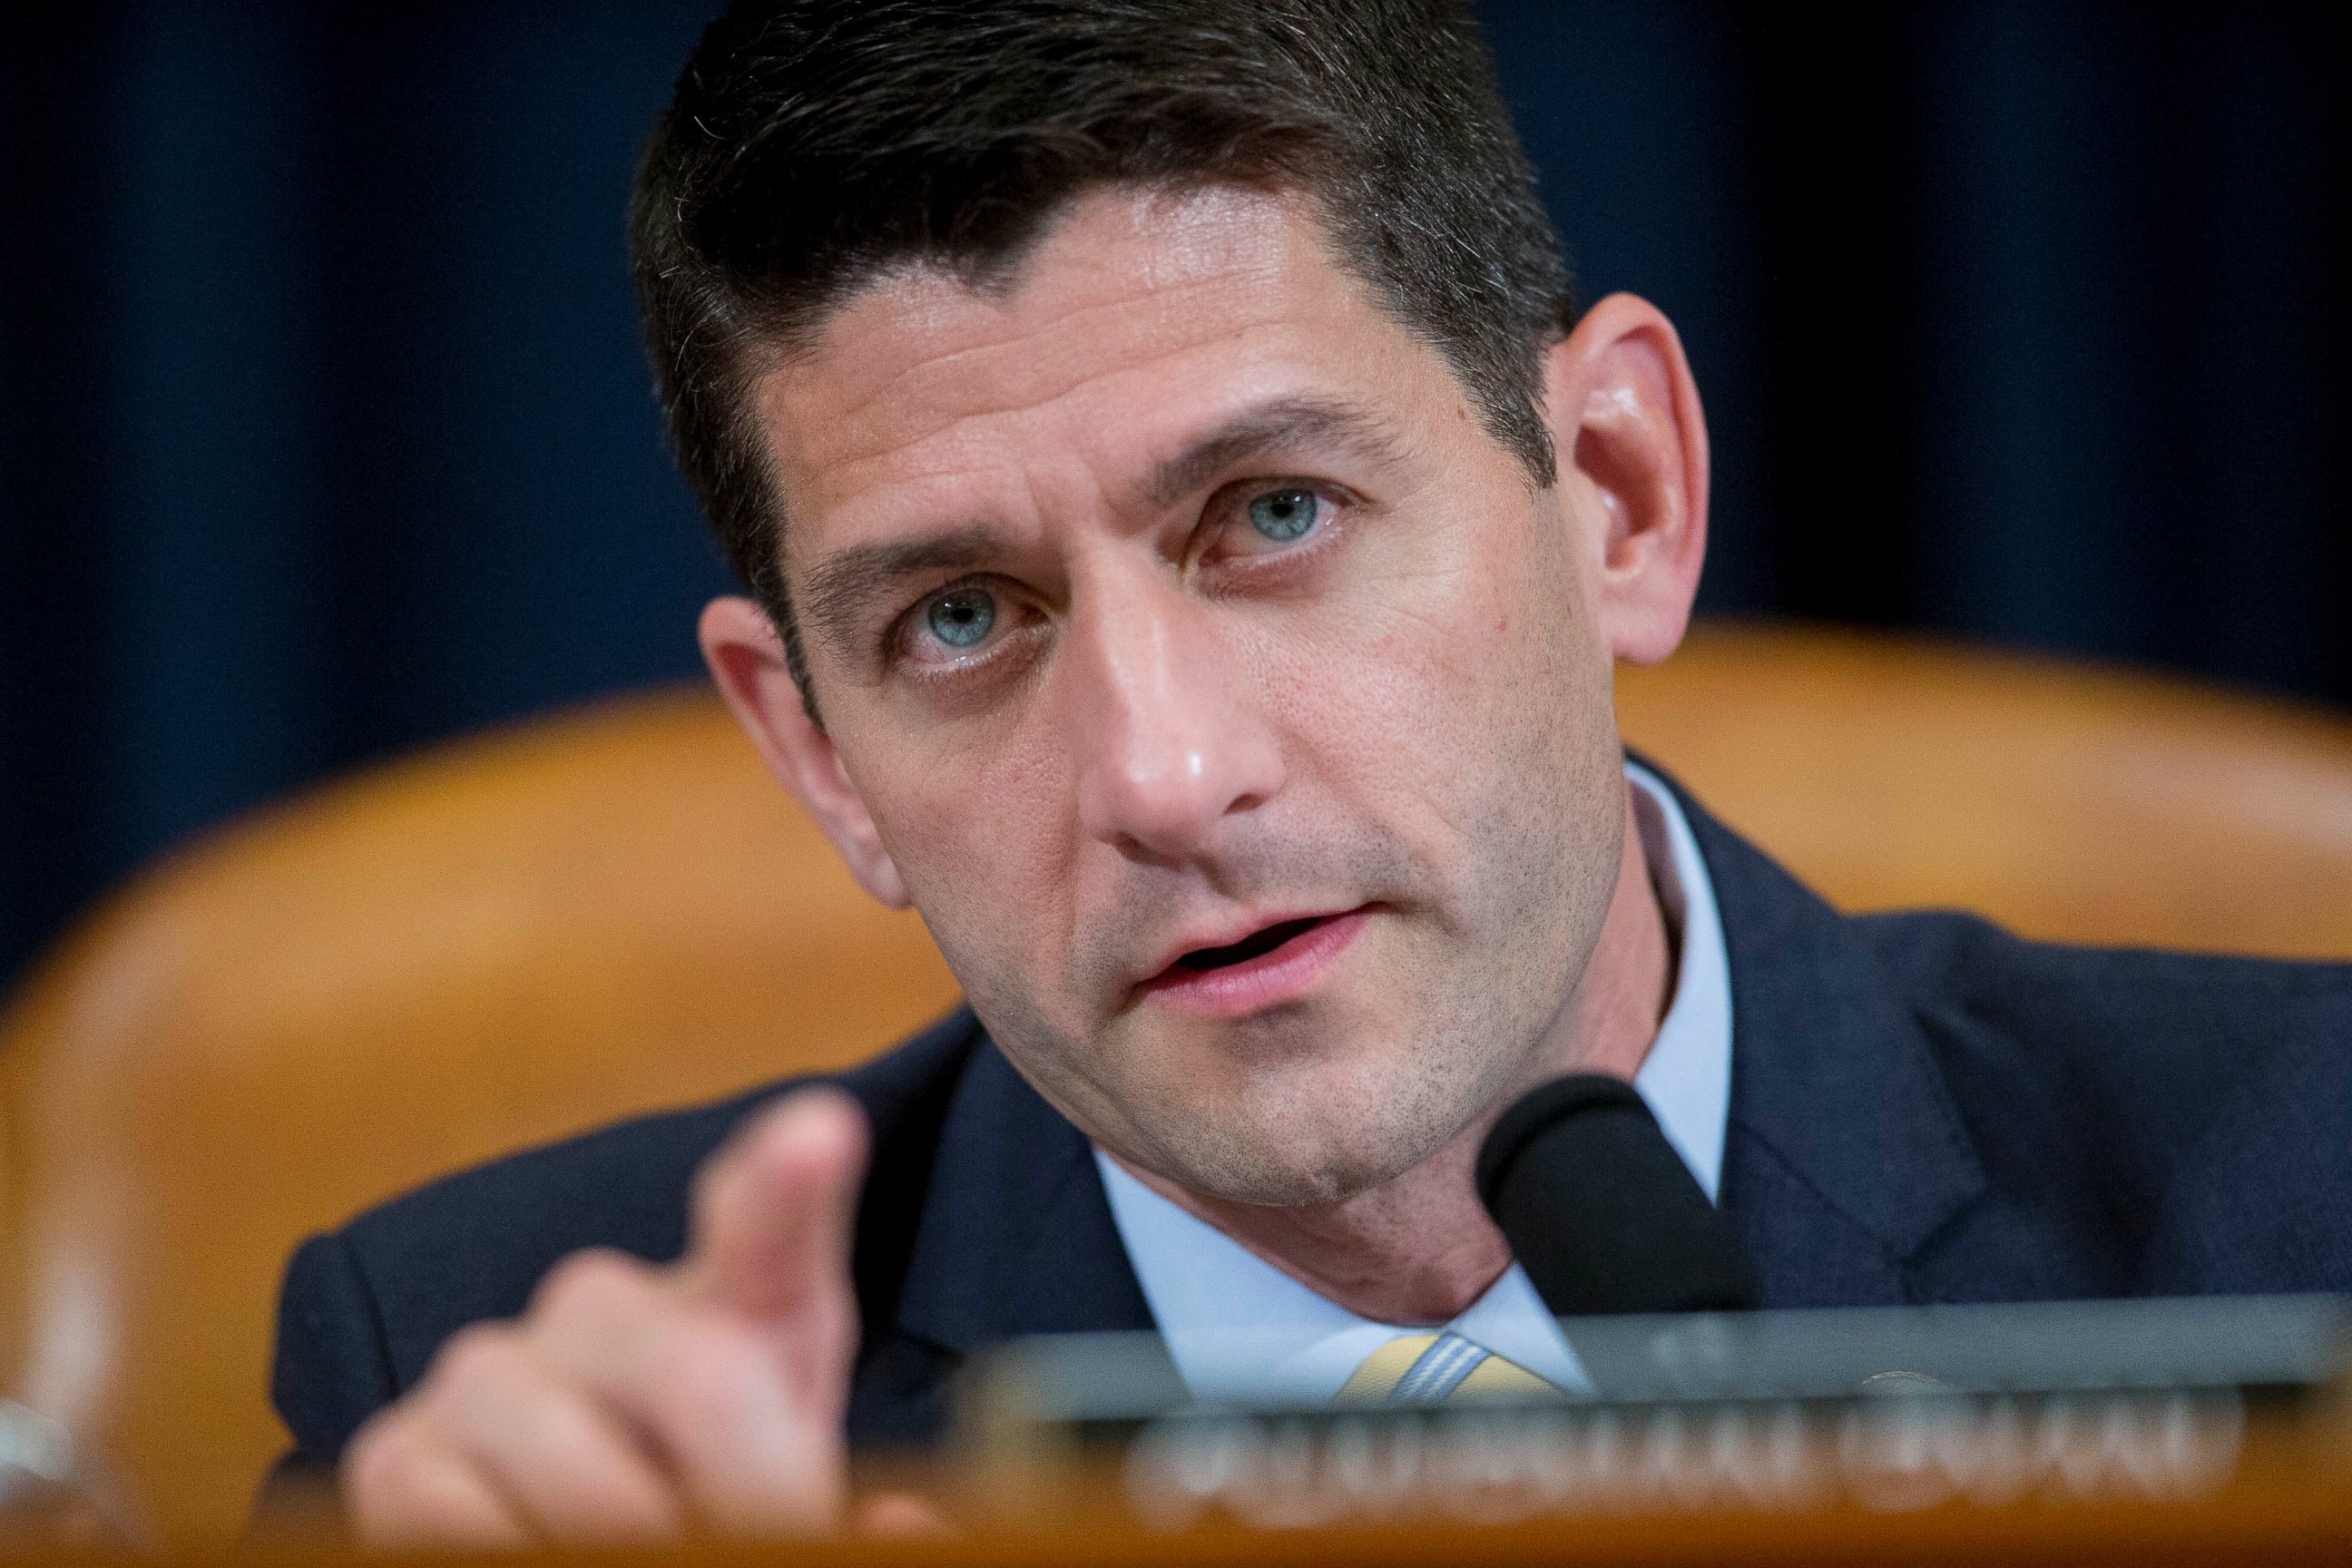 PHOTO: Representative Paul Ryan questions witnesses during a House Ways and Means Committee hearing in Washington, July 17, 2015.